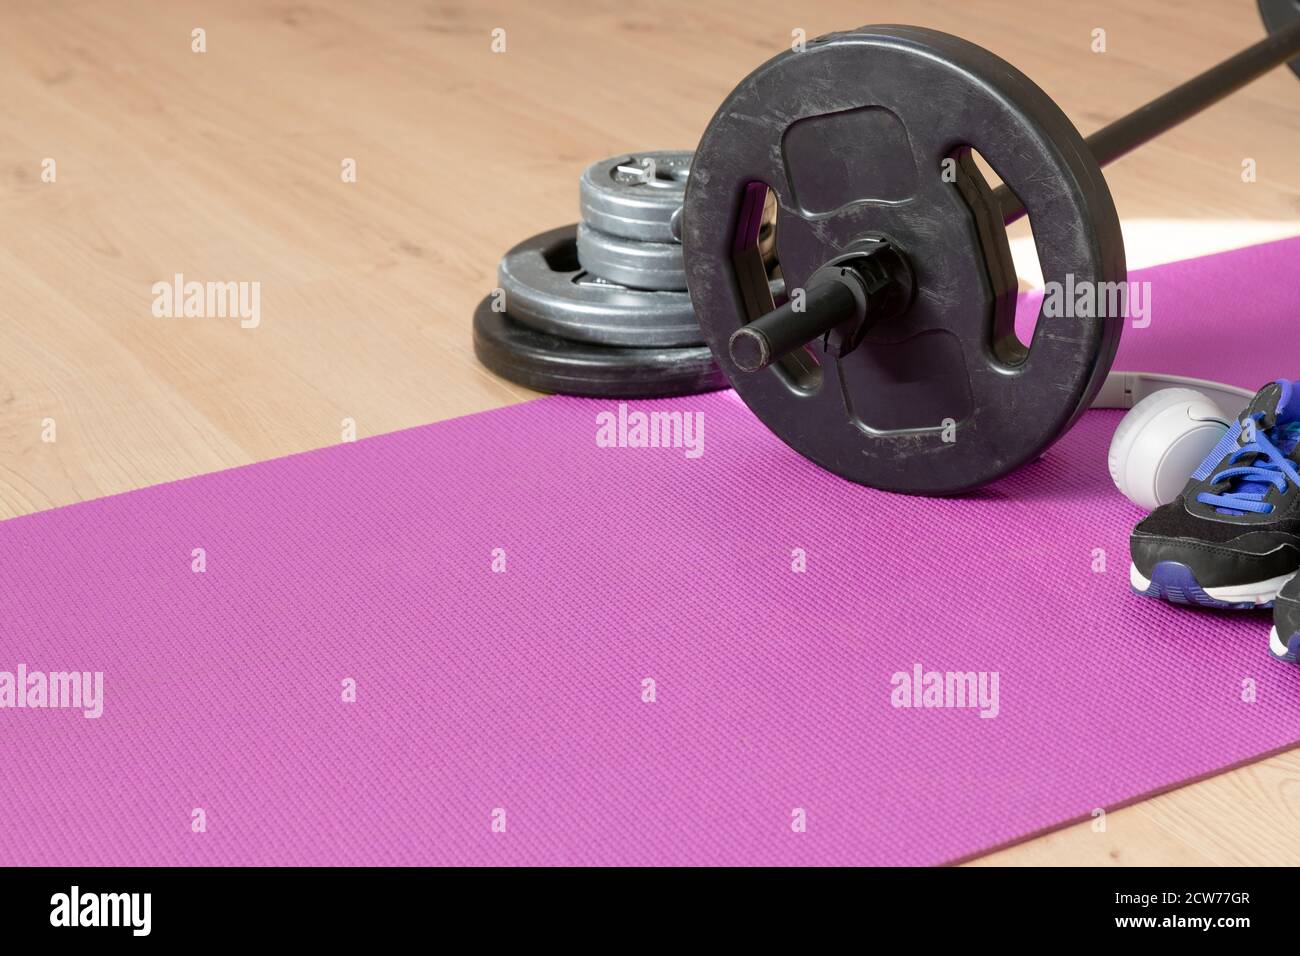 Fitness tools dumbbells yoga mat and shoes on a wooden floor in natural light. Healthy living concept. Stock Photo